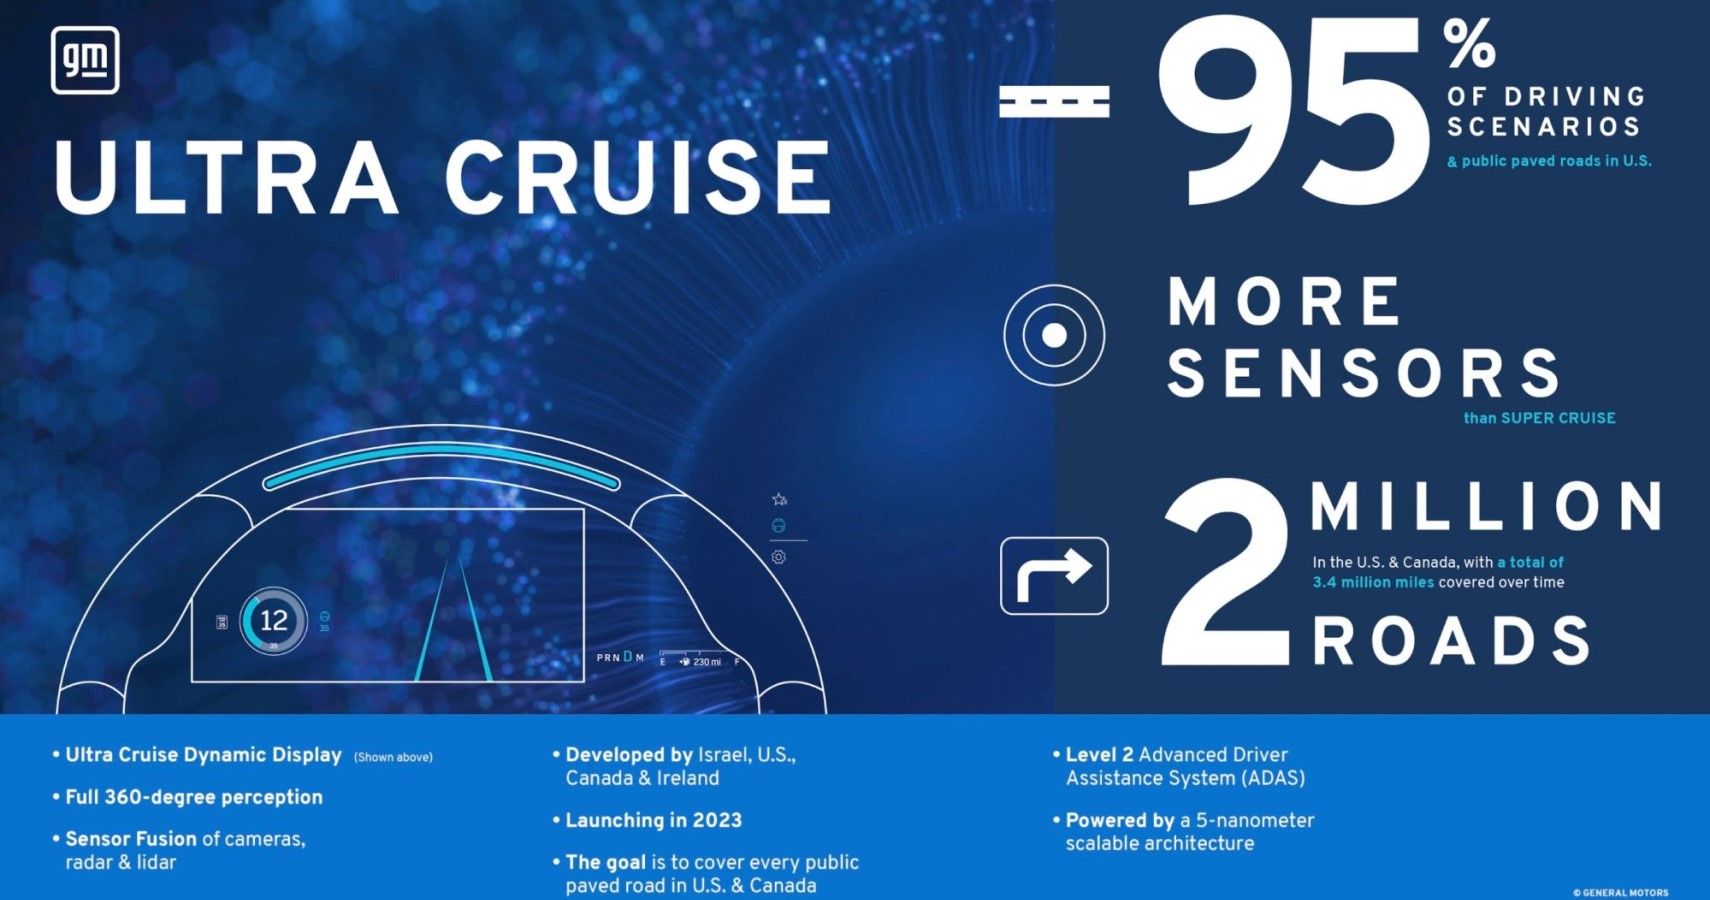 GM's Ultra Cruise features infograph